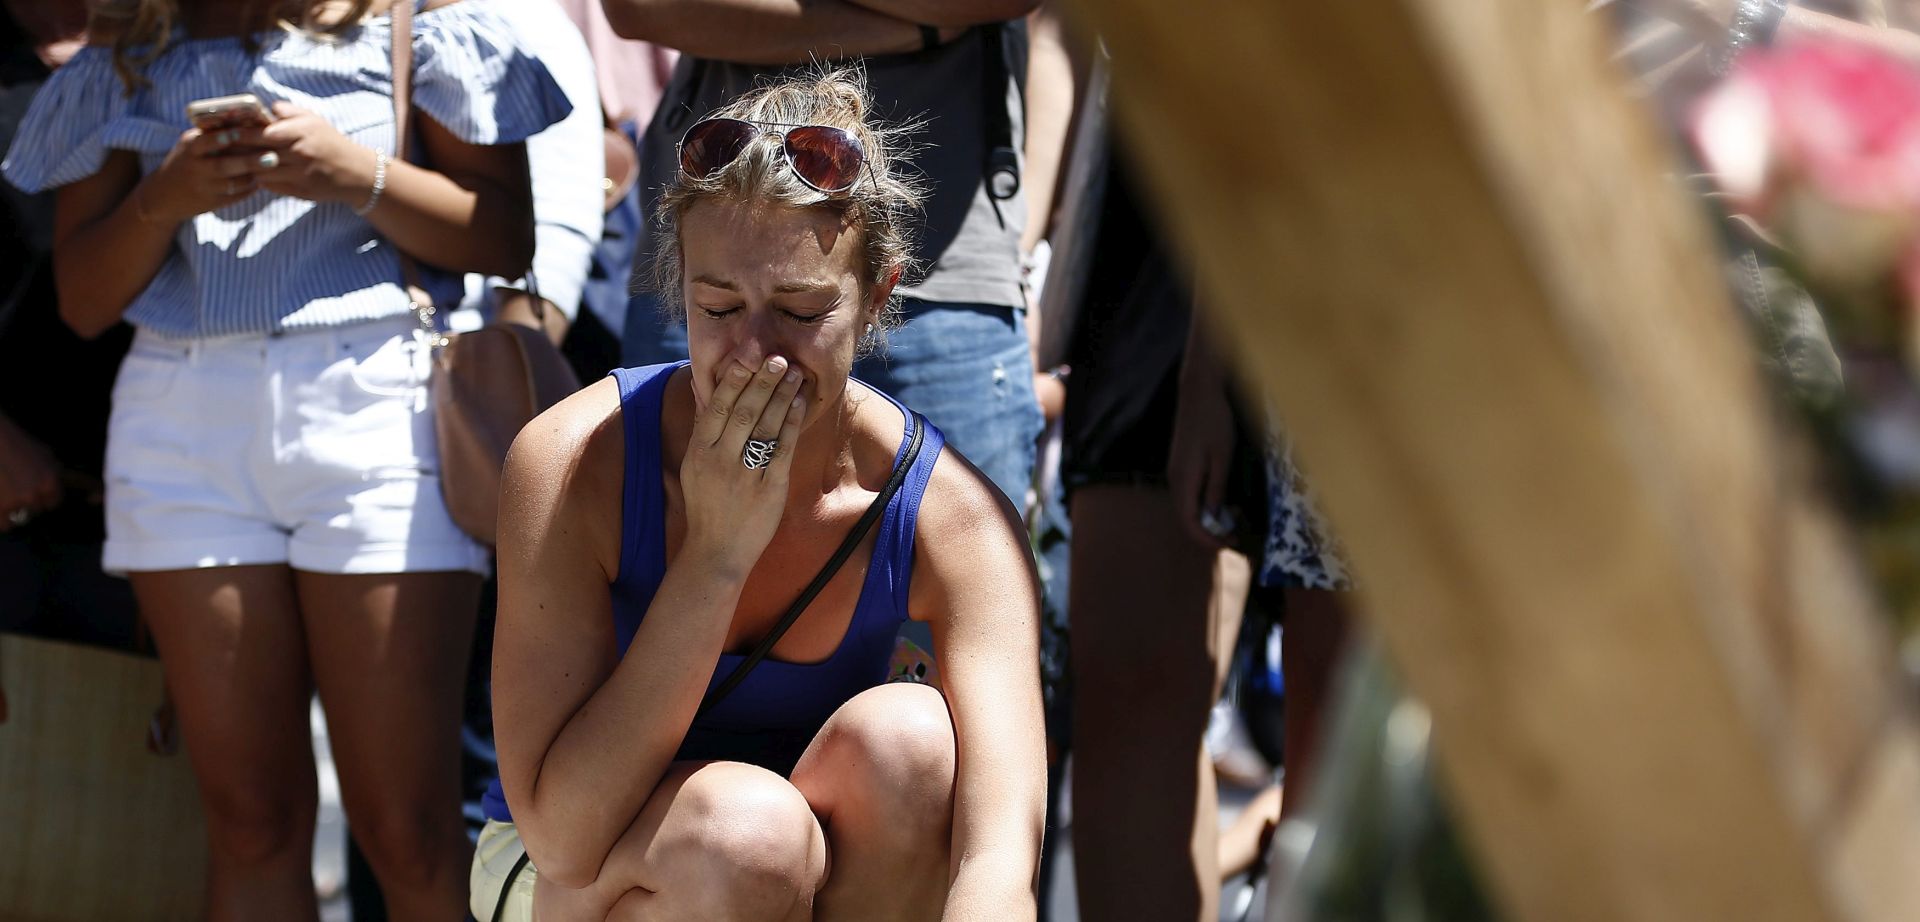 epa05426134 A woman reacts as she places flowers in front of the memorial set on the 'Promenade des Anglais' where the truck crashed into the crowd during the Bastille Day celebrations in Nice, France, 15 July 2016. According to reports, at least 84 people died and many were wounded after a truck drove into the crowd on the famous Promenade des Anglais during celebrations of Bastille Day in Nice, late 14 July. Anti-terrorism police took over the investigation in the incident, media added.  EPA/IAN LANGSDON